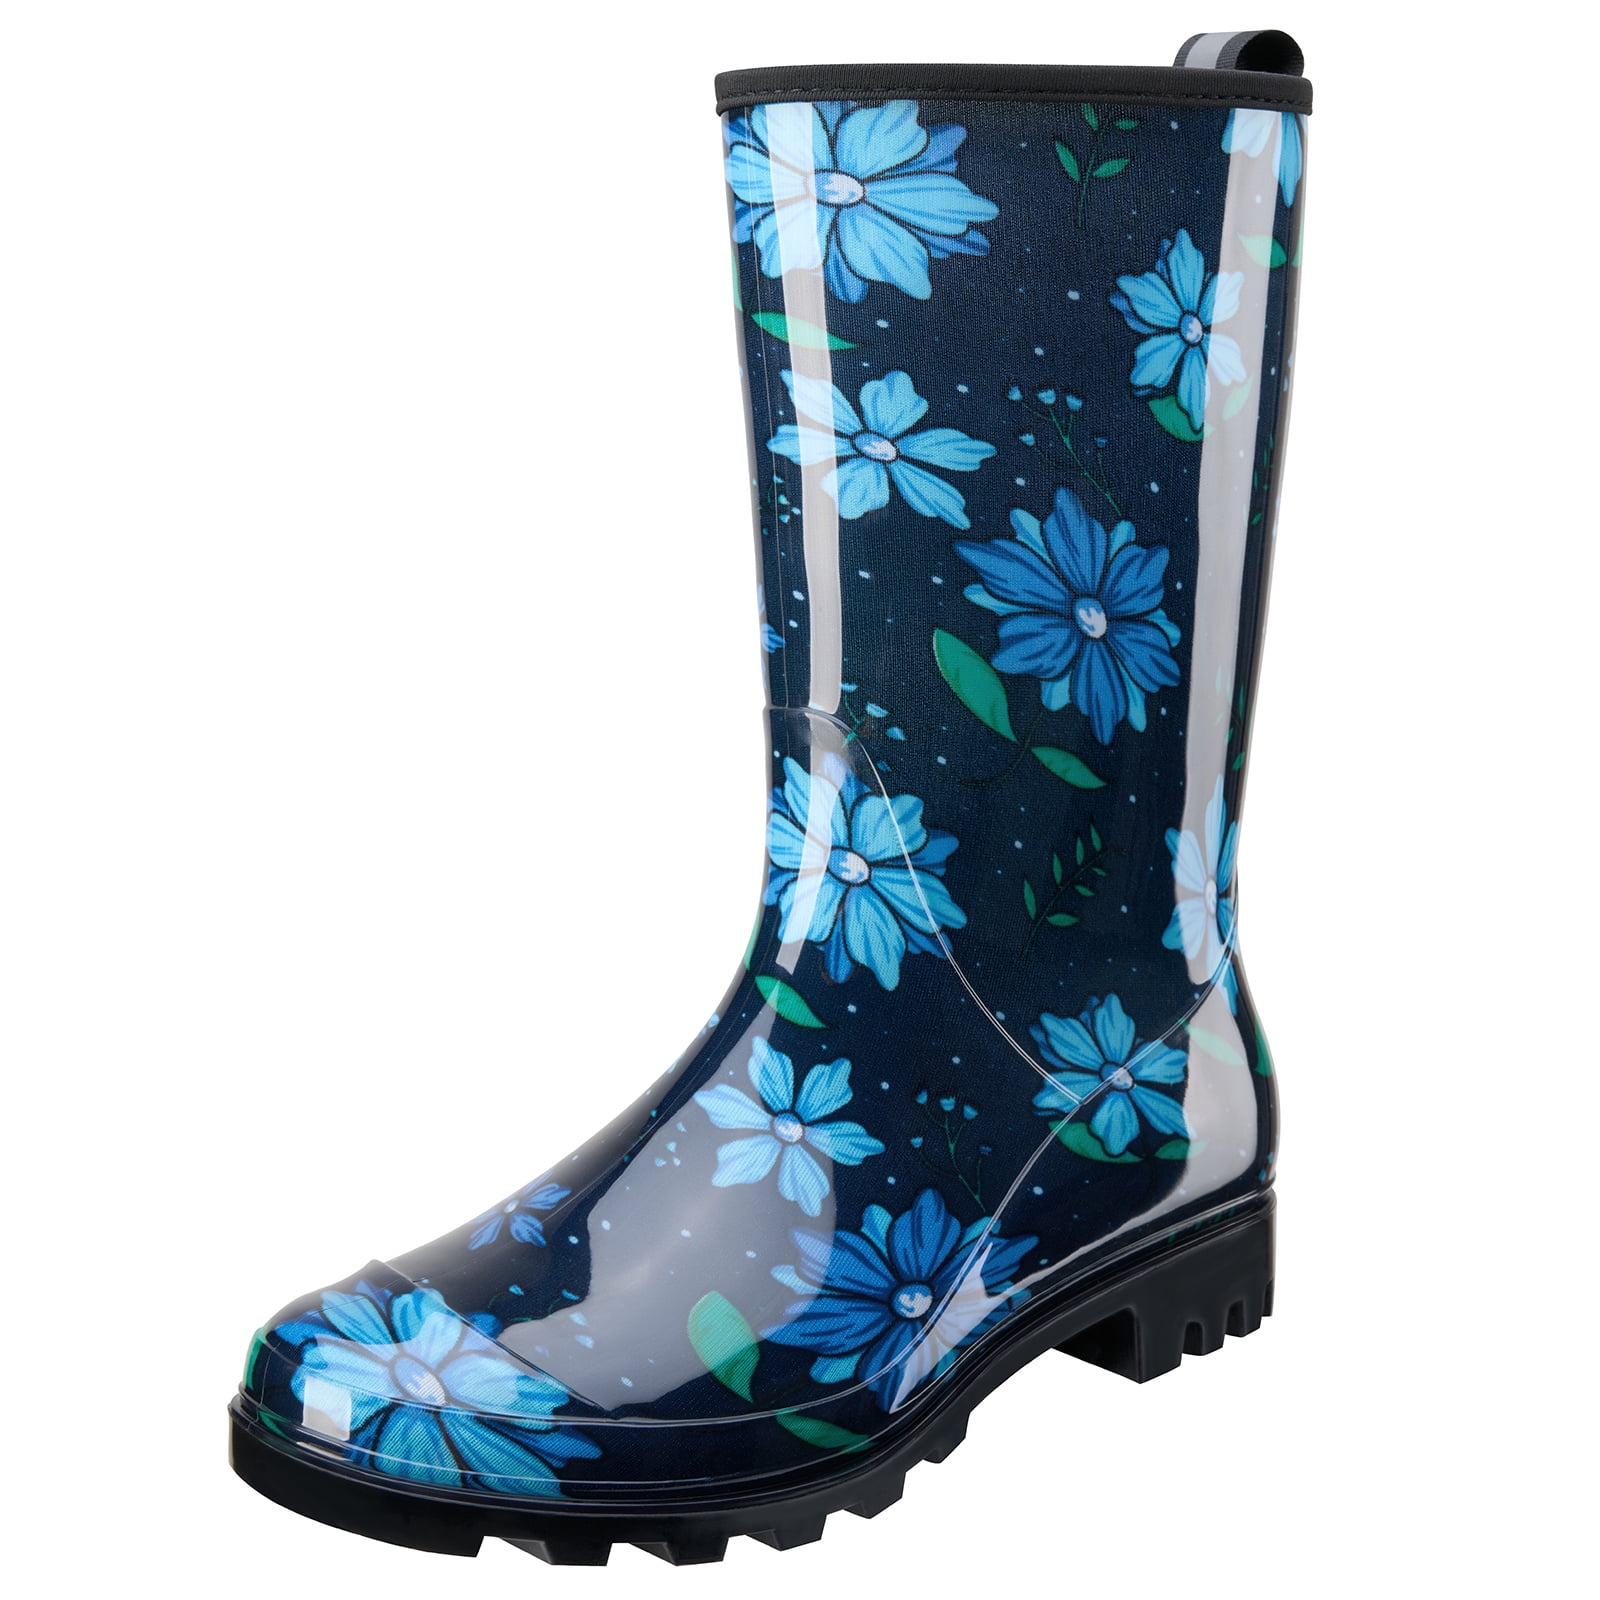 Womens Floral Mid Calf Rain Boots Ladys Pull on Skidproof Waterproof Booties 